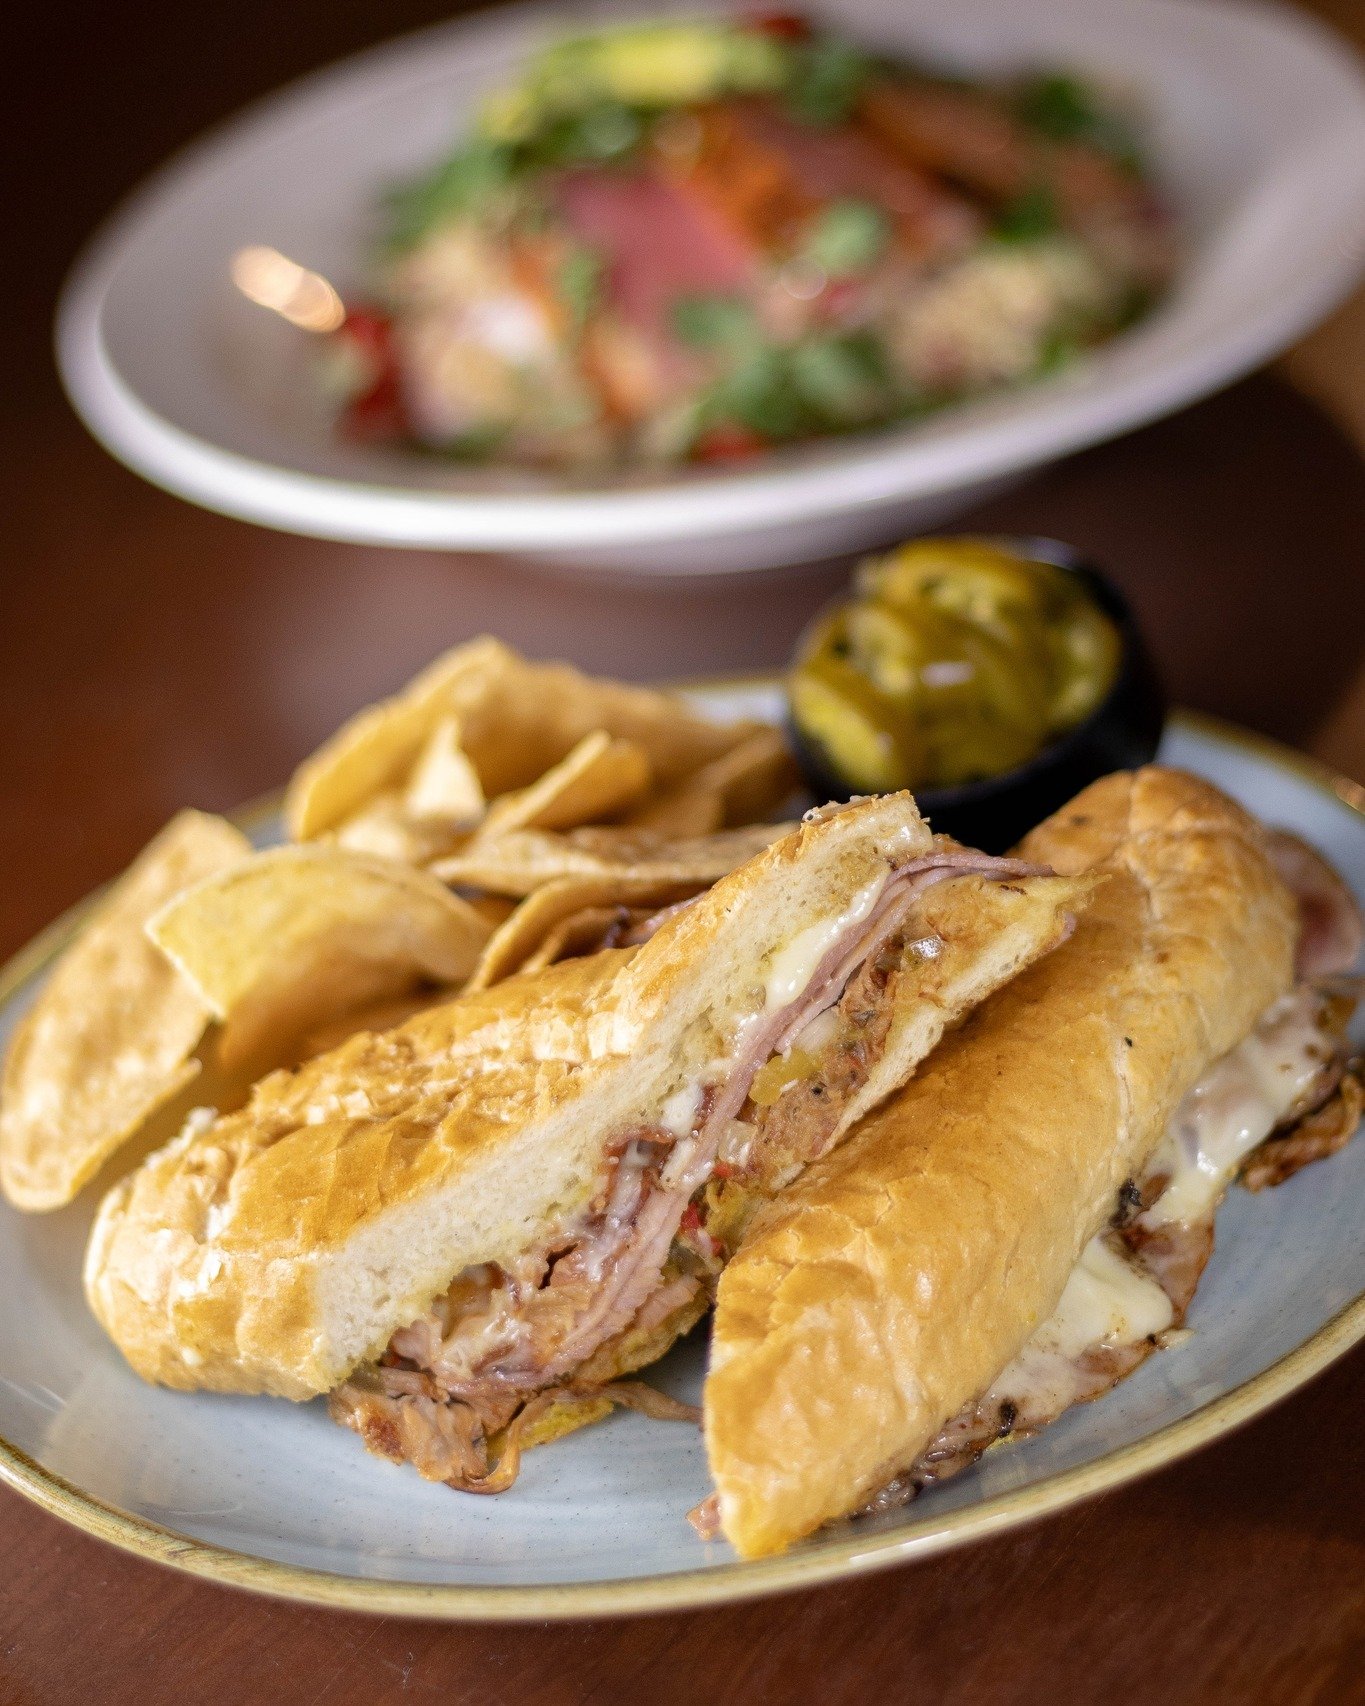 LET'S LUNCH 😋 We're open at 11 AM daily in Edina &amp; Wed-Fri in St. Paul. Most of our menu is available all the time, but we do have a couple special items you can only order during the day. Come try our new cubano sandwich with ham, slow-cooked p